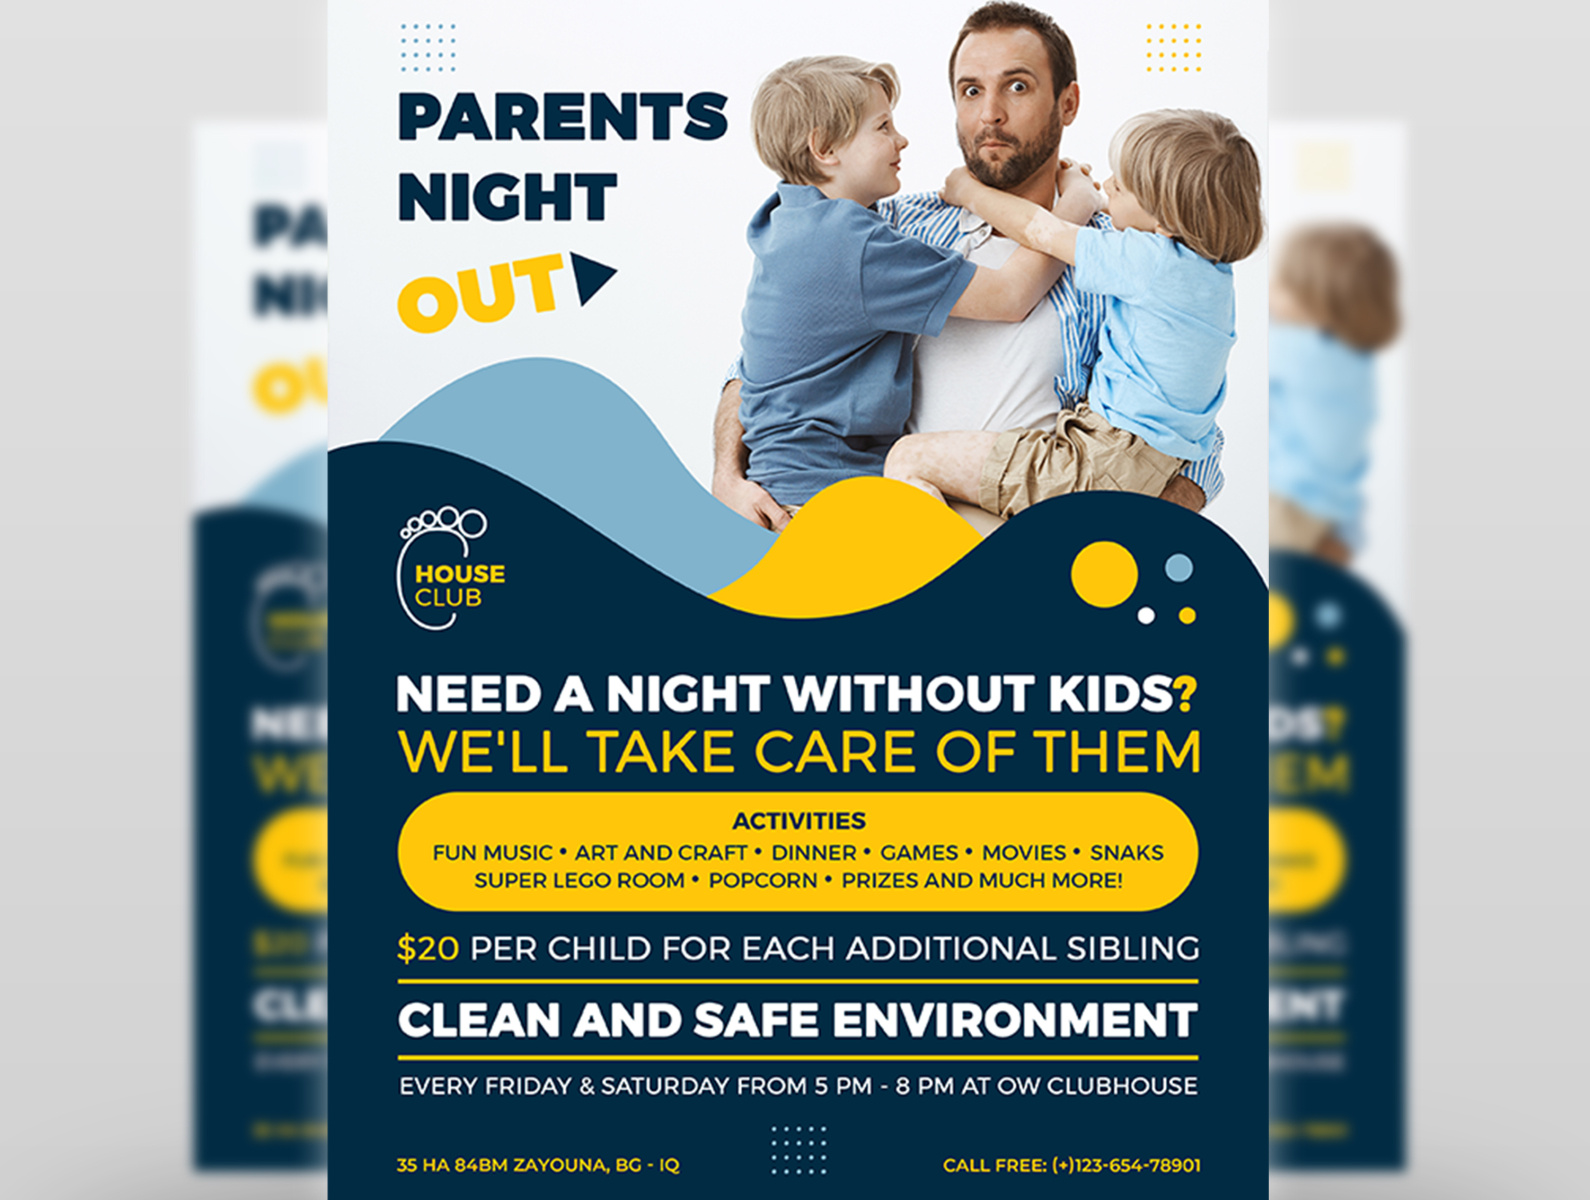 parents-night-out-flyer-template-by-owpictures-on-dribbble